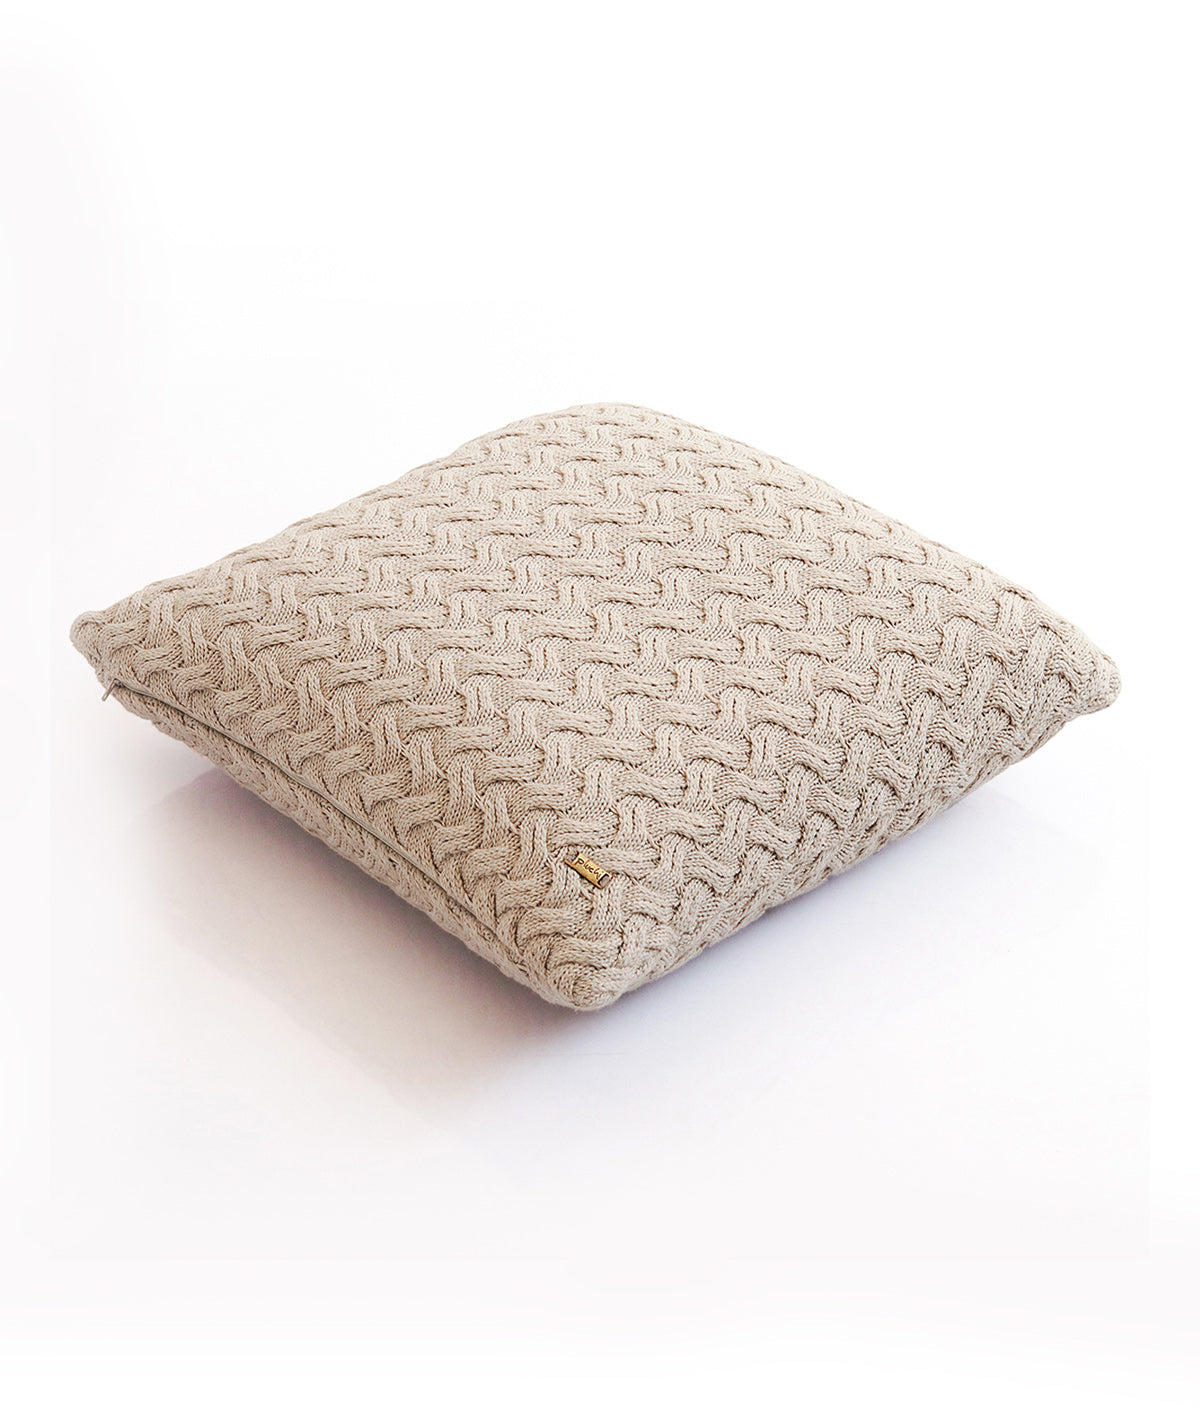 Criss Cross Knitted Throw & Cushion Cover(2 pcs) Gift Combo in Natural Color